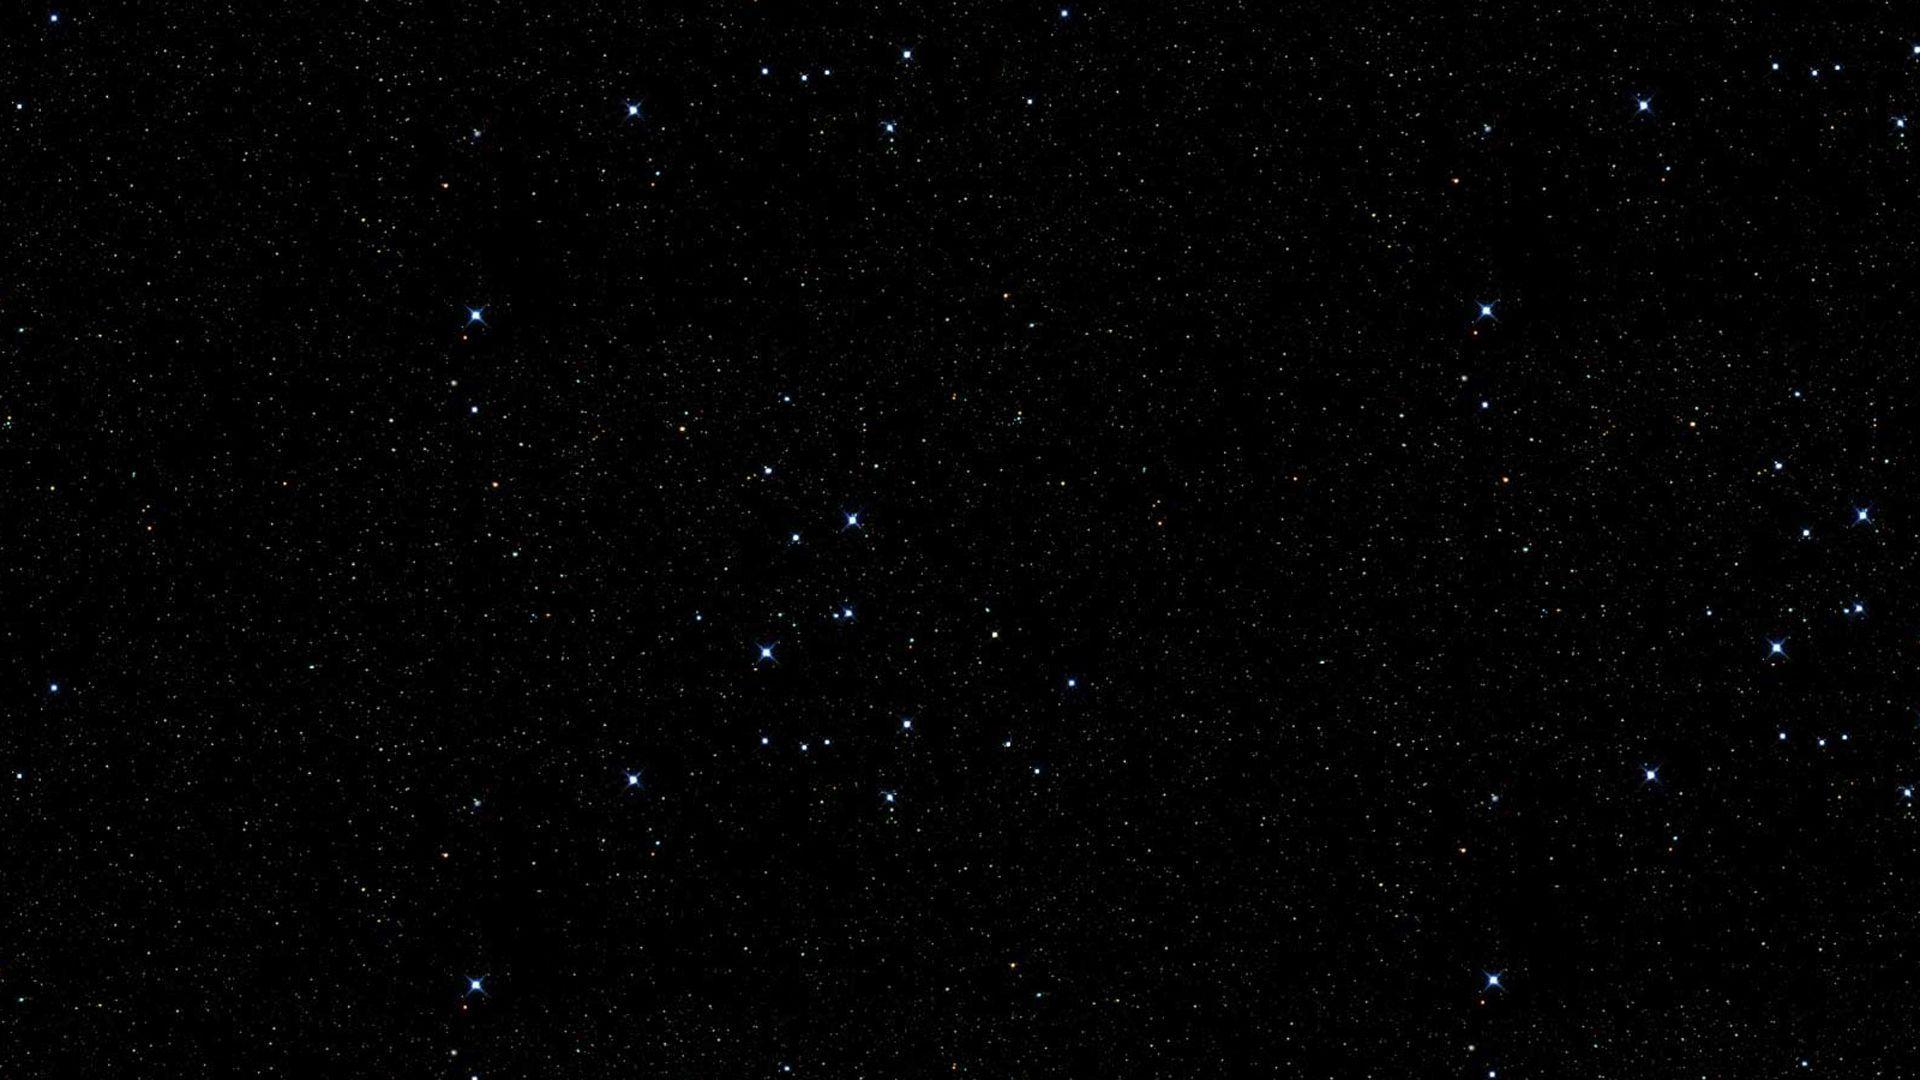  Stars  Backgrounds  Wallpaper  Cave